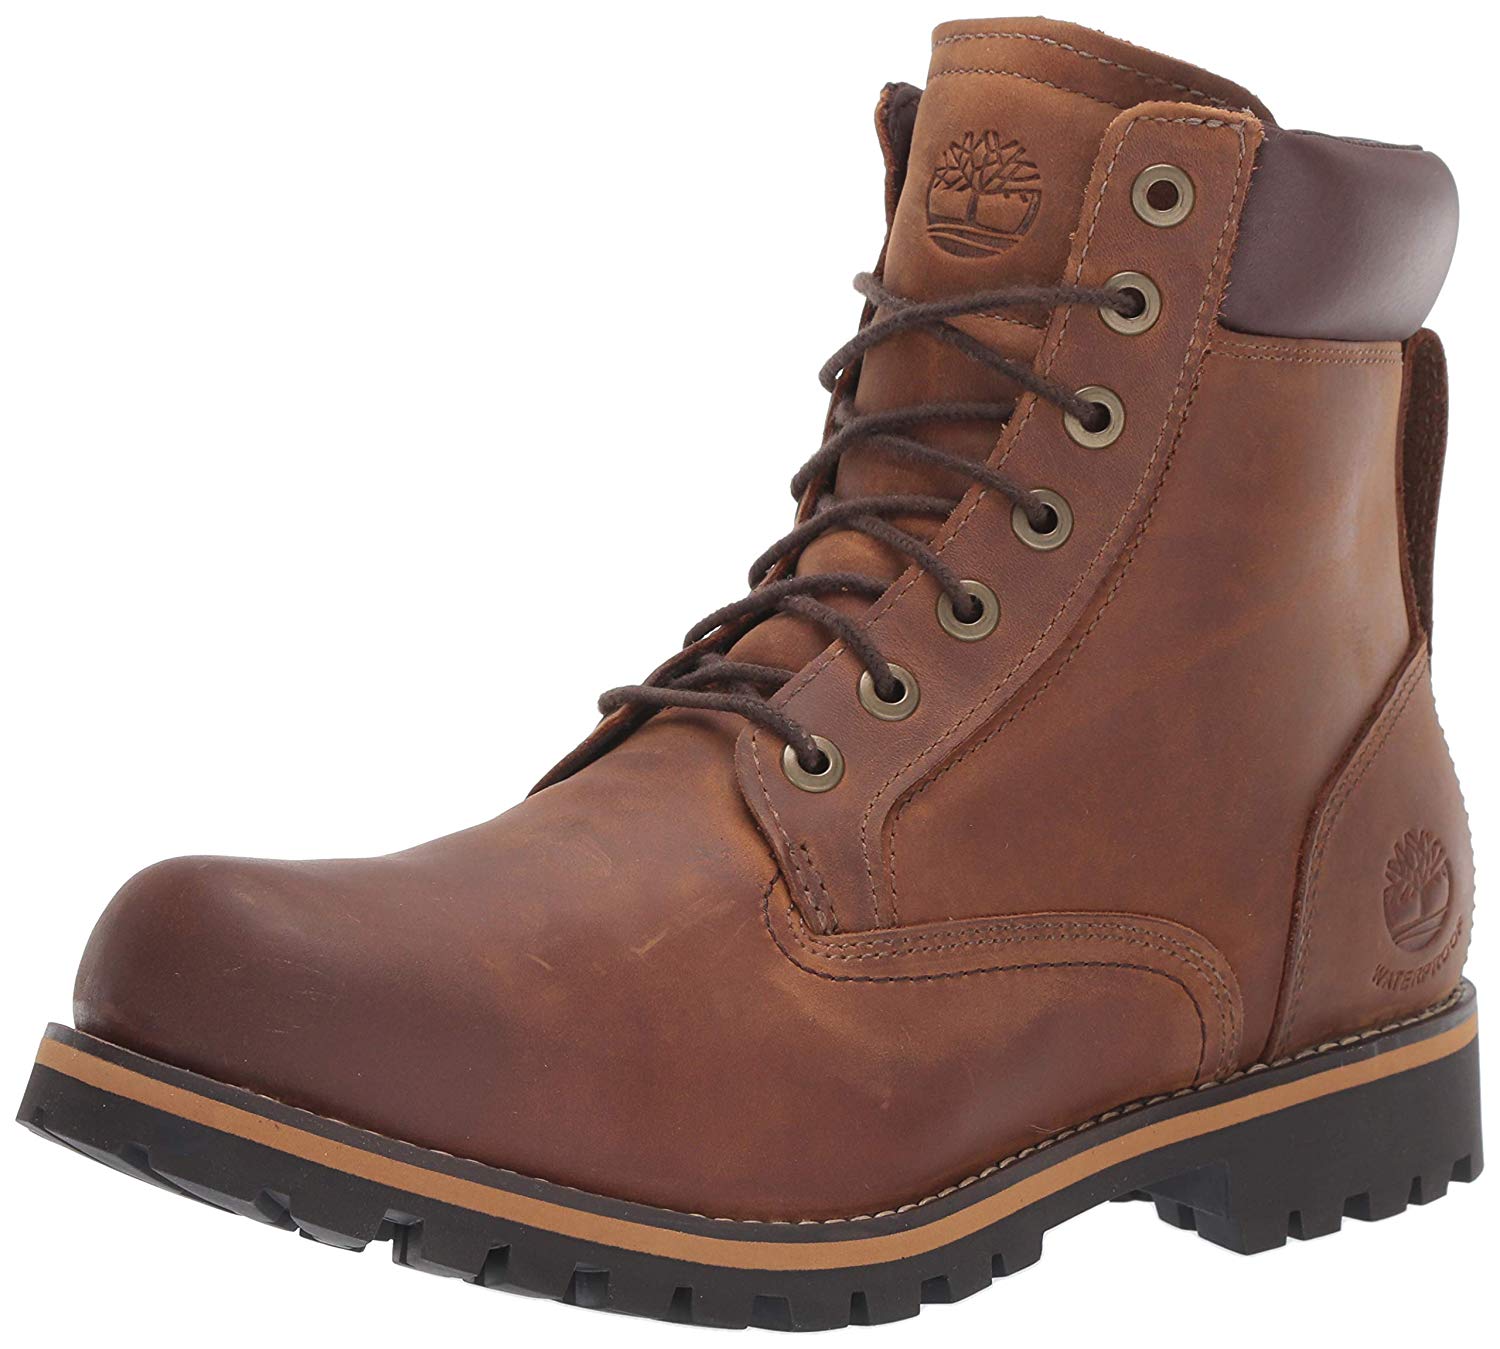 Earthkeepers Rugged BOOTS Brown Leather 